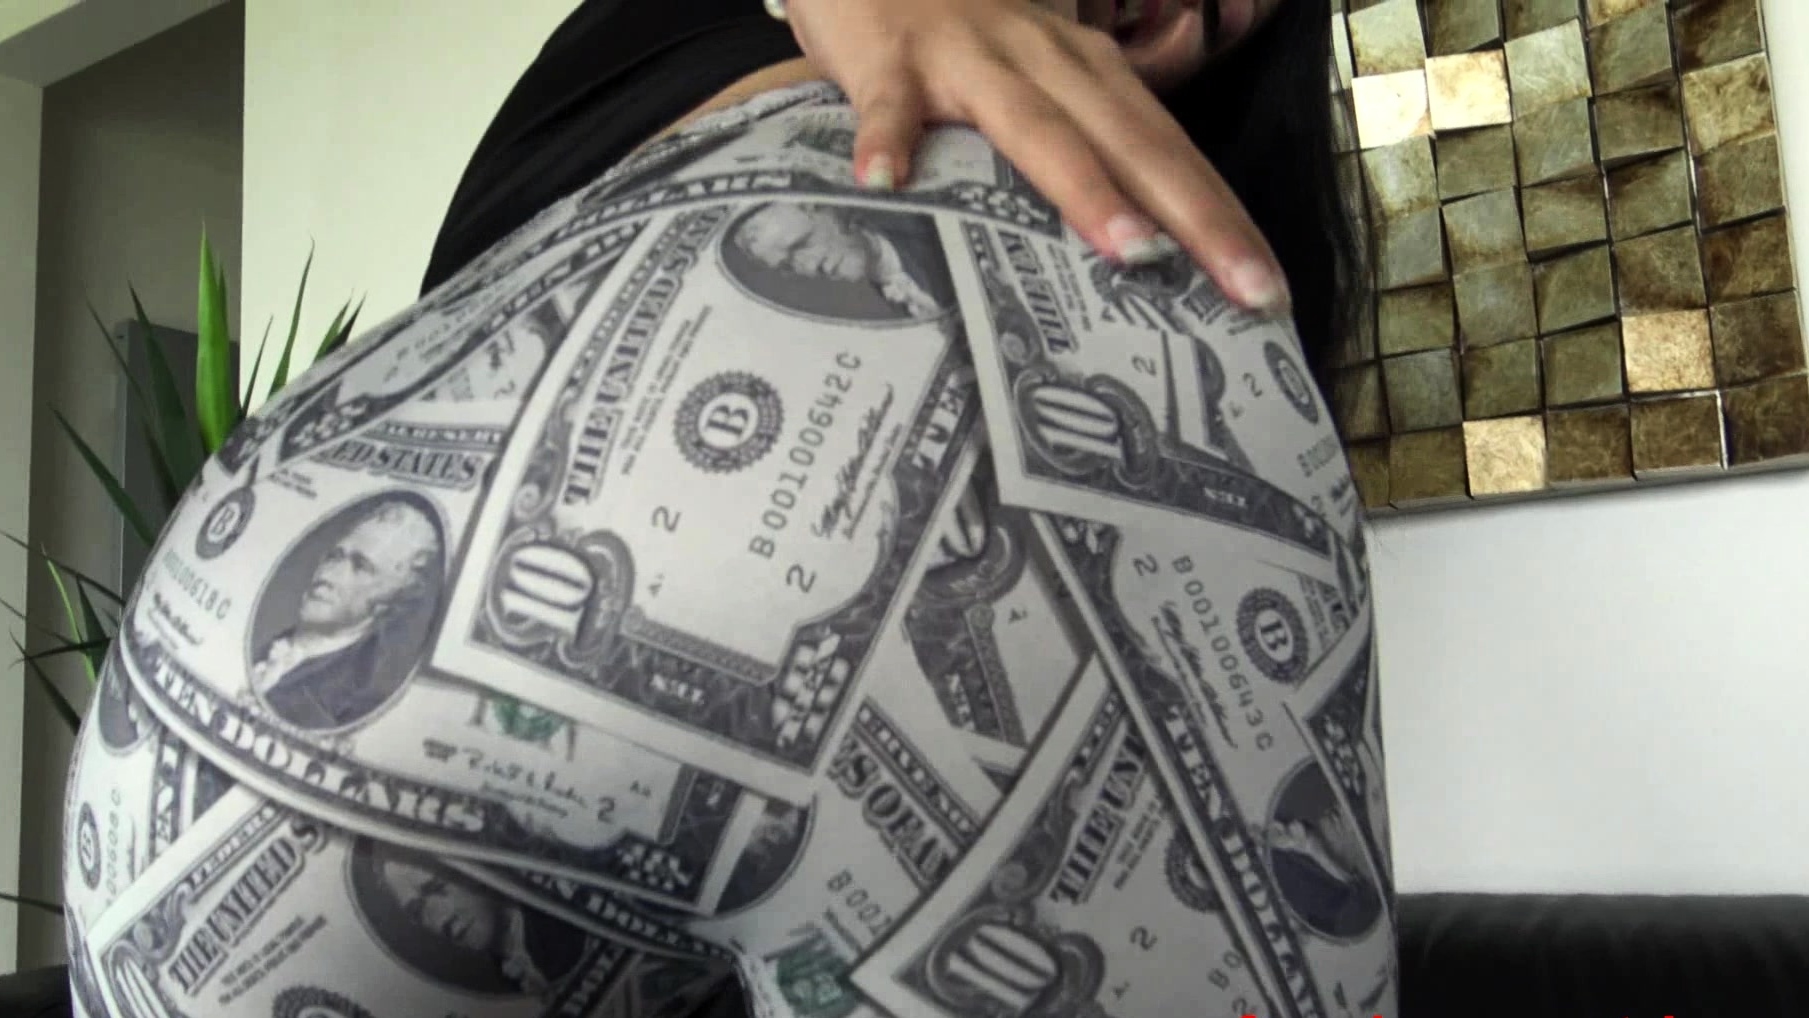 moving her rich and big ass with her tight $10 dollar shorts